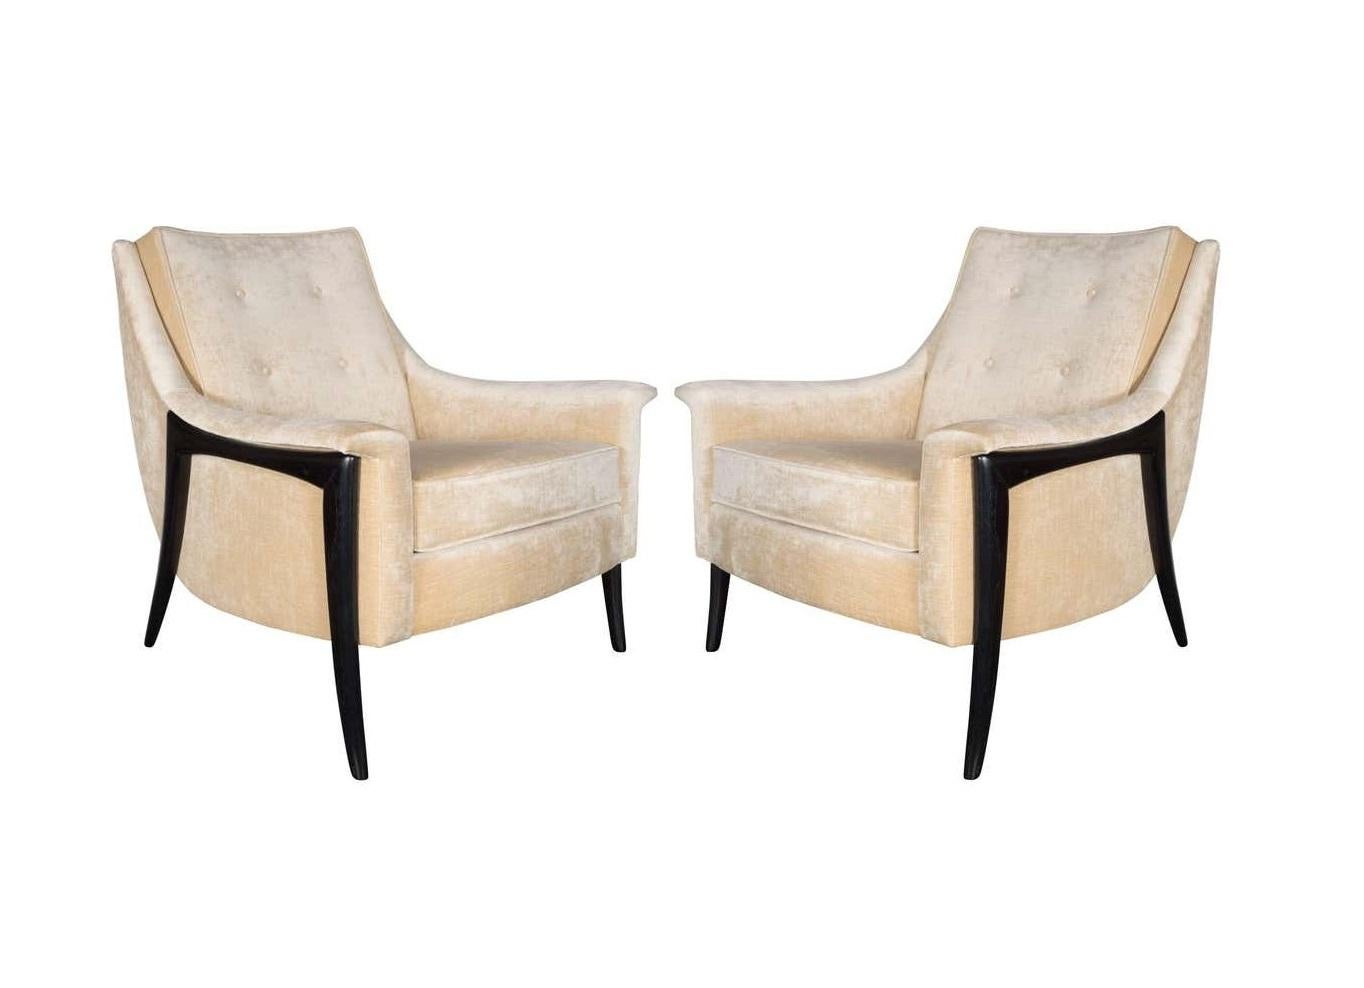 This stunning pair by Kroehler Avant Designs. Featuring sleek curved backs, leading to padded arms with a removable seat cushions all rising on sculptural form splayed legs. The legs are made of walnut and have a nice ebonized finish that